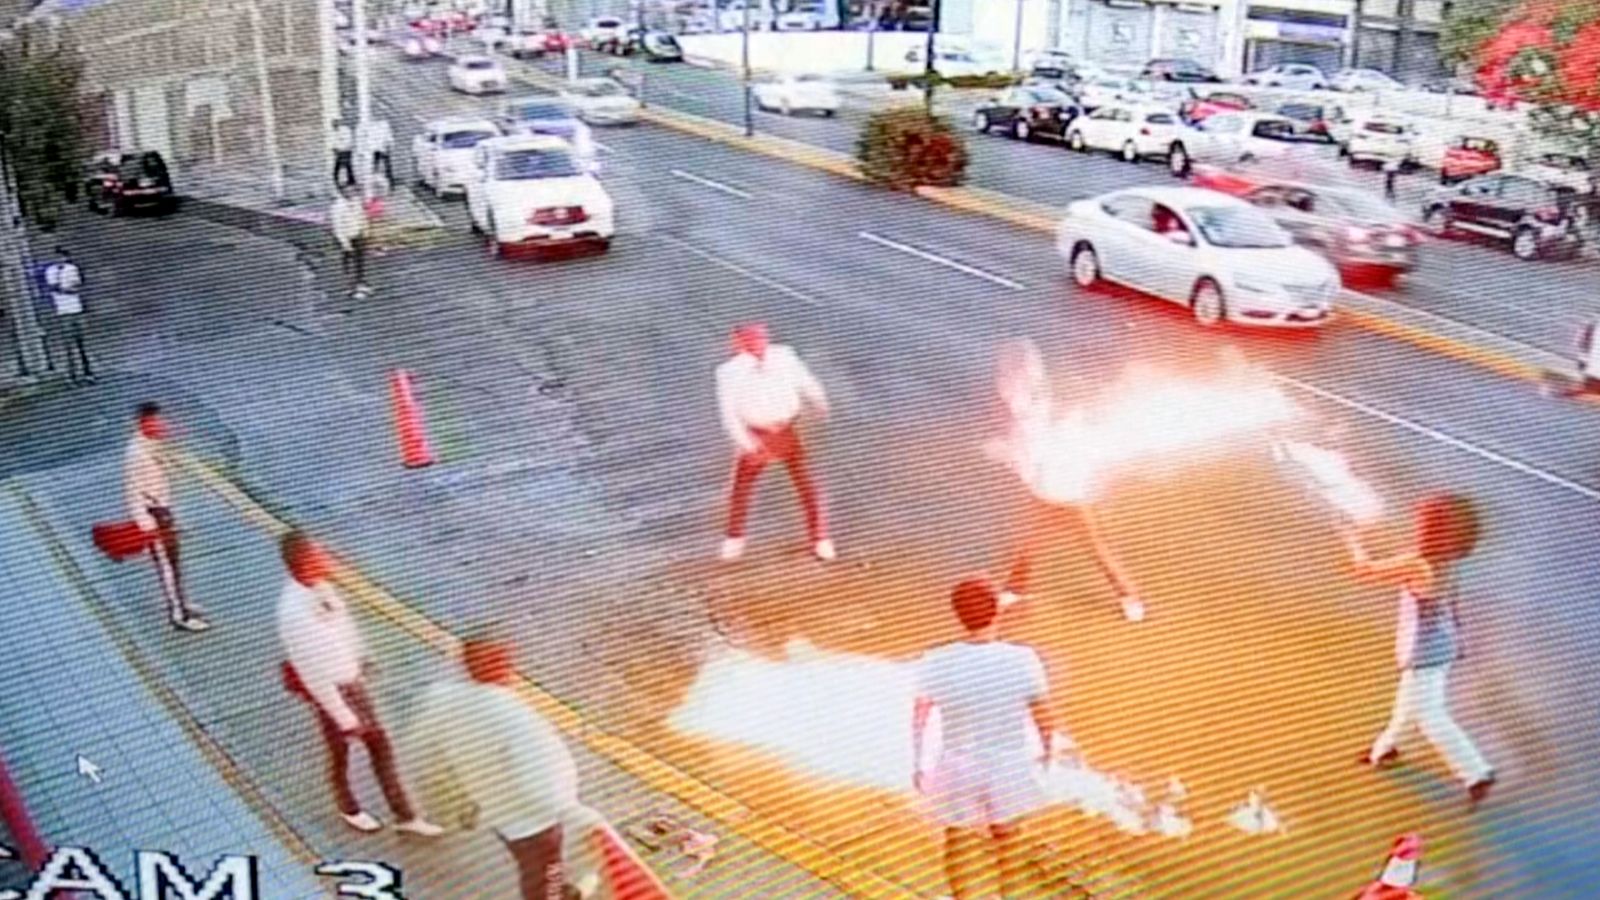 Mexico: Fire-breather fights off marauding mariachis in 'turf war over tips'